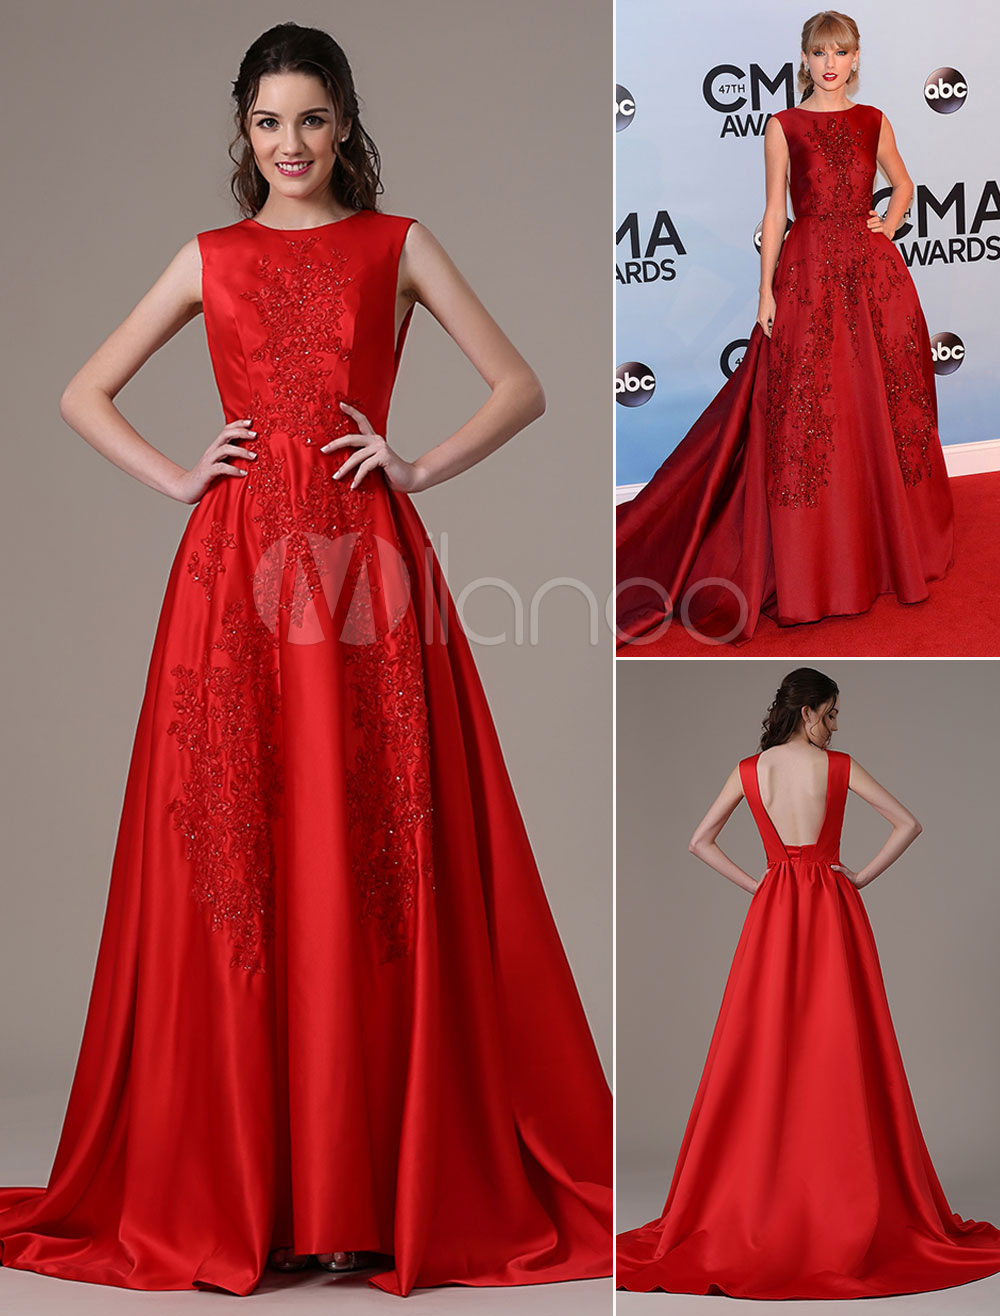 Red Prom Dresses 2020 Long Princess Party Dress Taylor Swift Cma Cutout Back Applique Beading Red Carpet Dress With Train